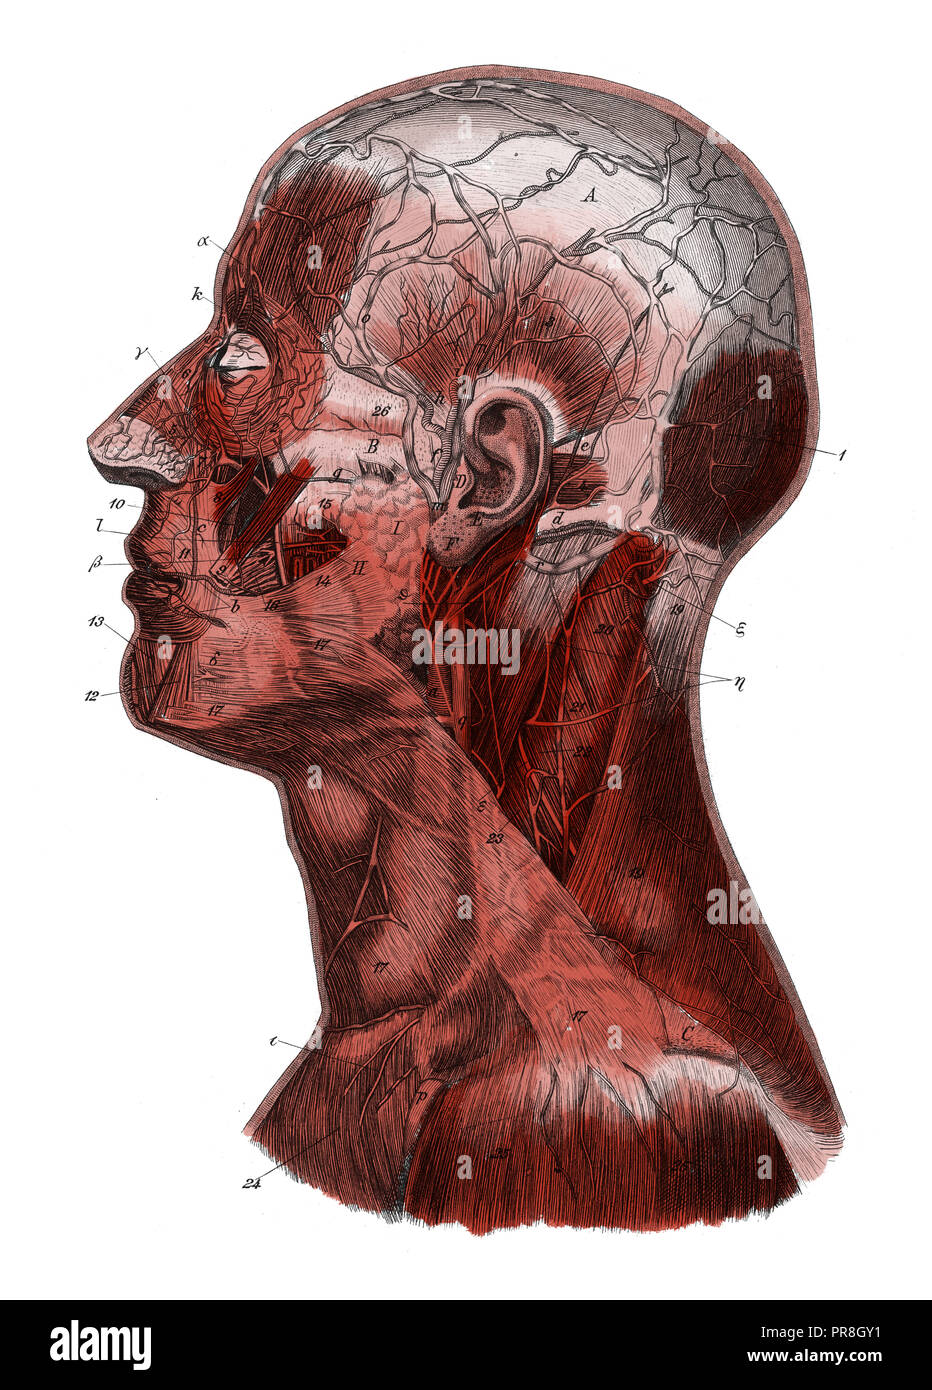 19th century illustration of a human head after removal of the skin. Published in Systematischer Bilder-Atlas zum Conversations-Lexikon, Ikonographisc Stock Photo